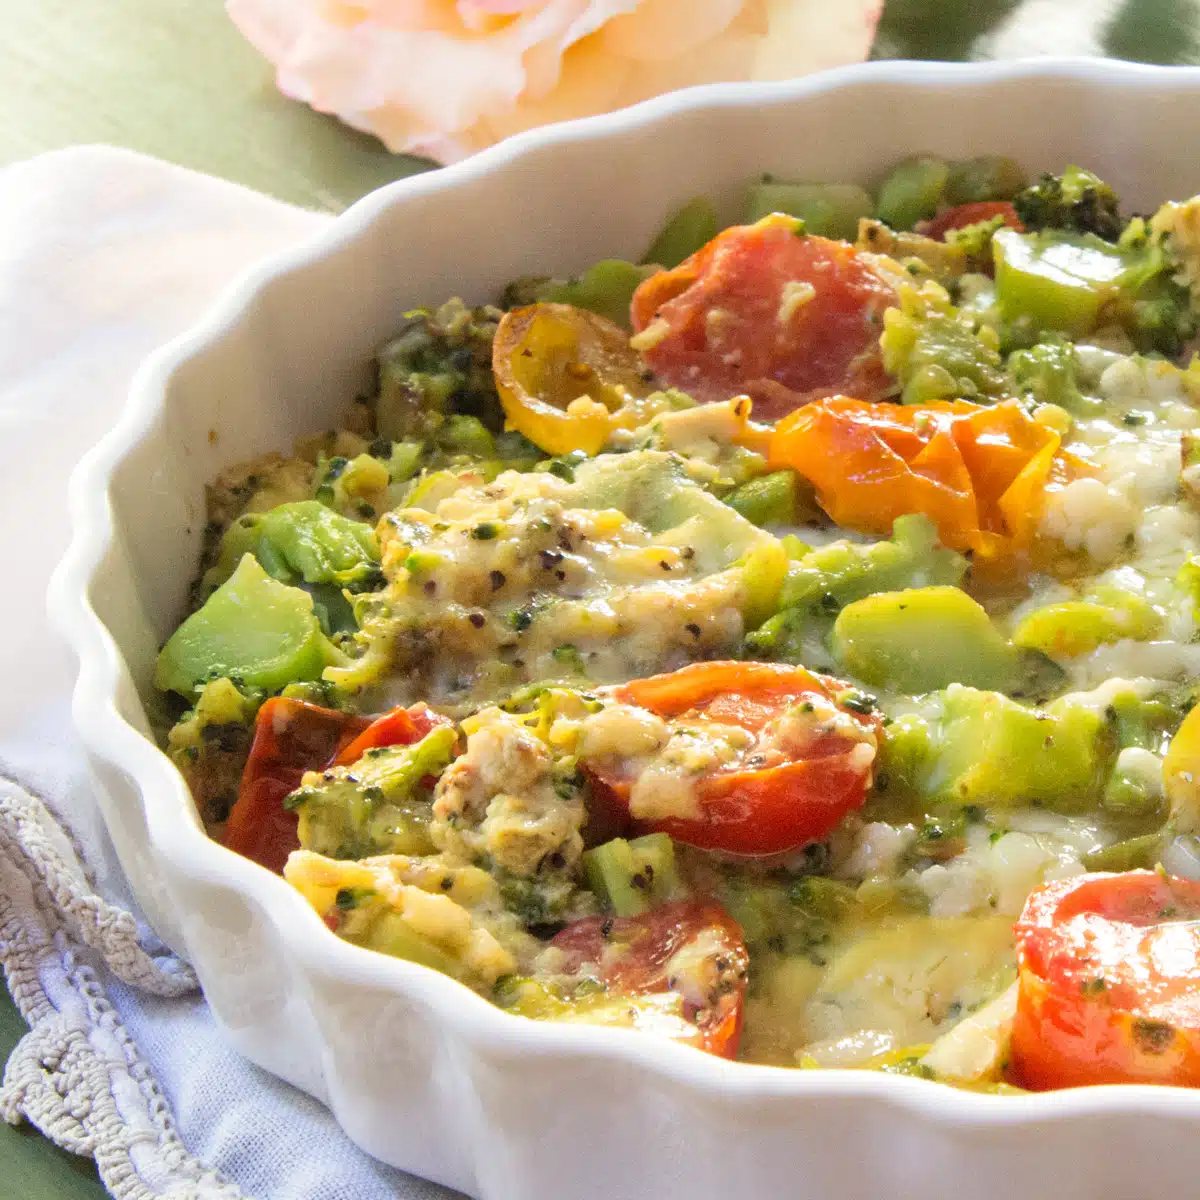 A frittata of eggs cooked with broccoli, cheddar cheese and tomatoes.